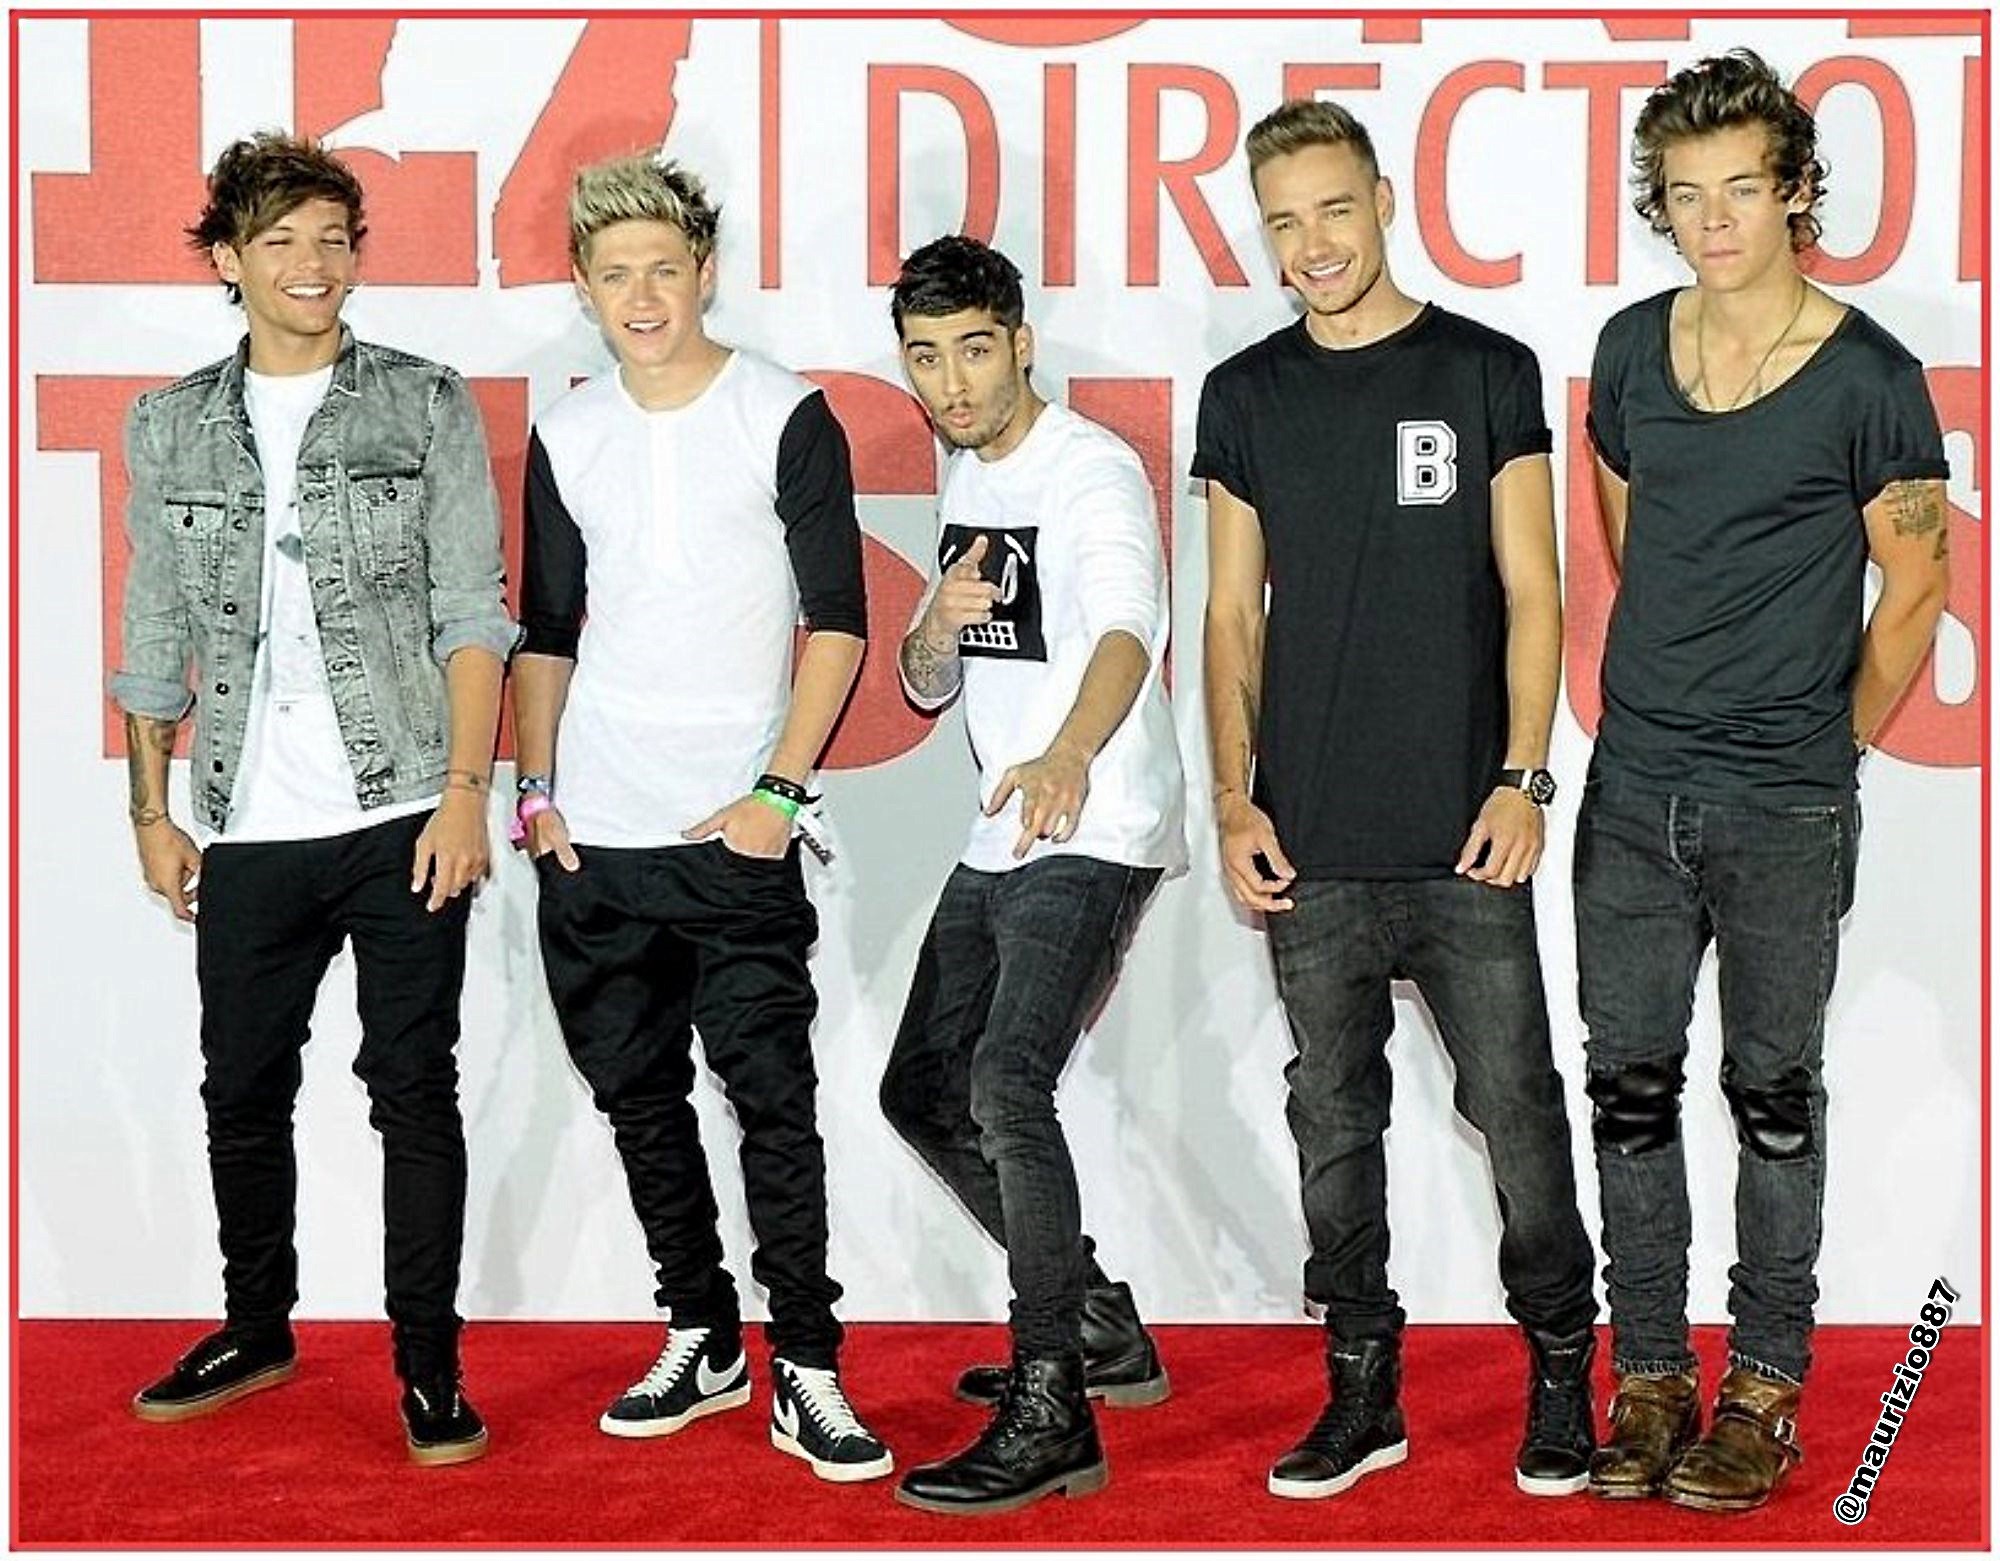 one direction HD Wallpaper and background photos of one direction 2013 for  fans of One Direction images.